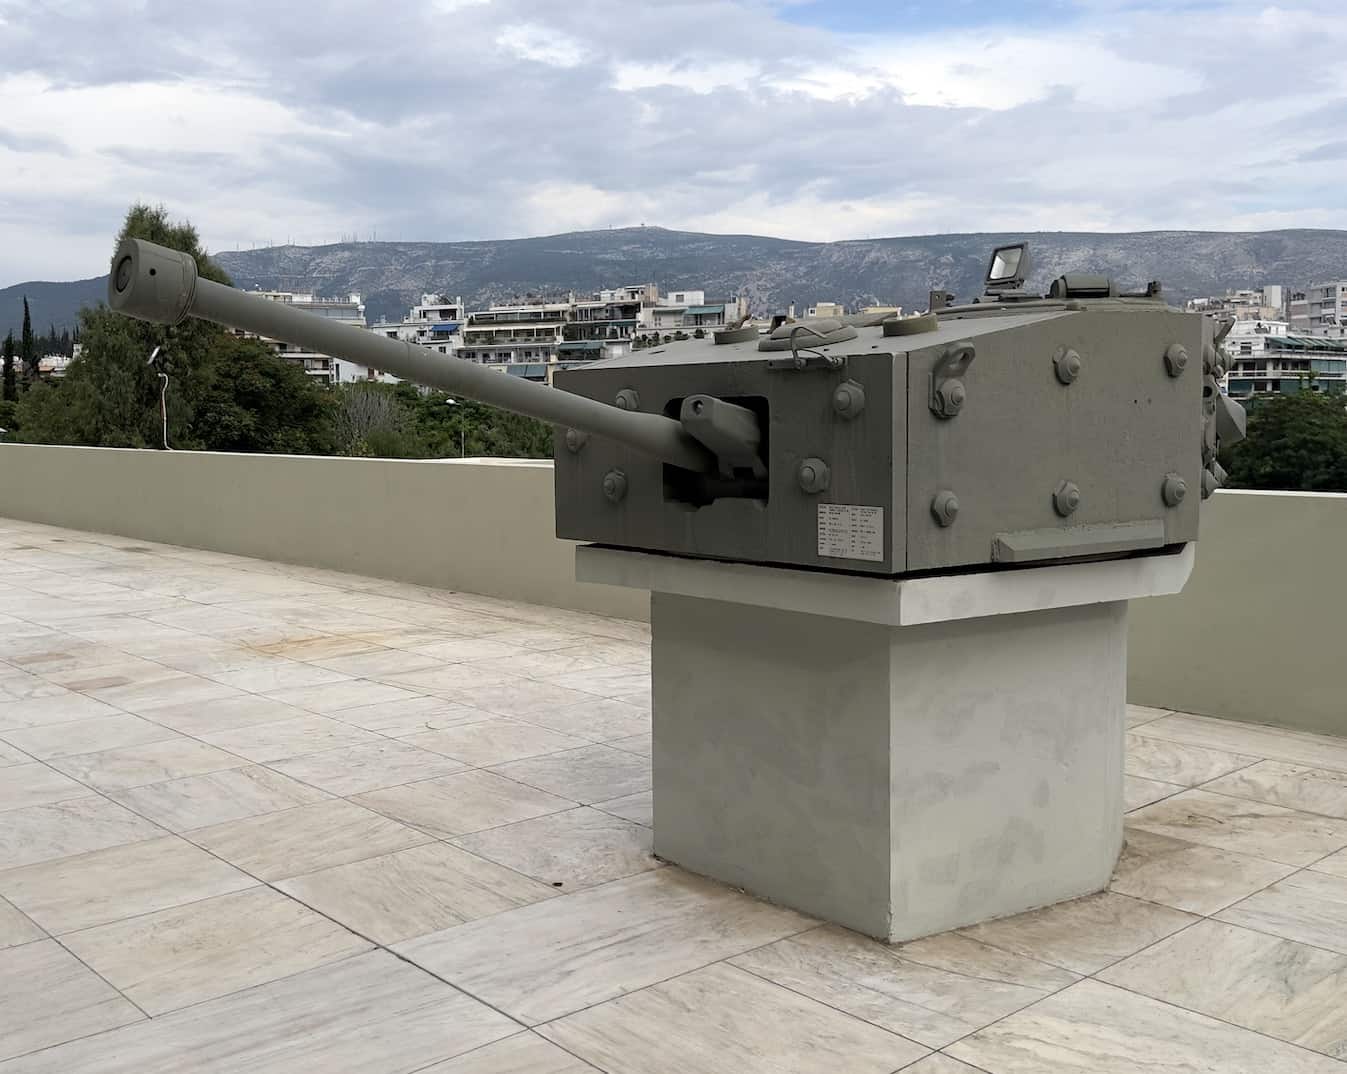 Turret from Centaur tank Mk VIII, Great Britain, used by the Hellenic Army from 1947 to 1960 at the War Museum in Athens, Greece